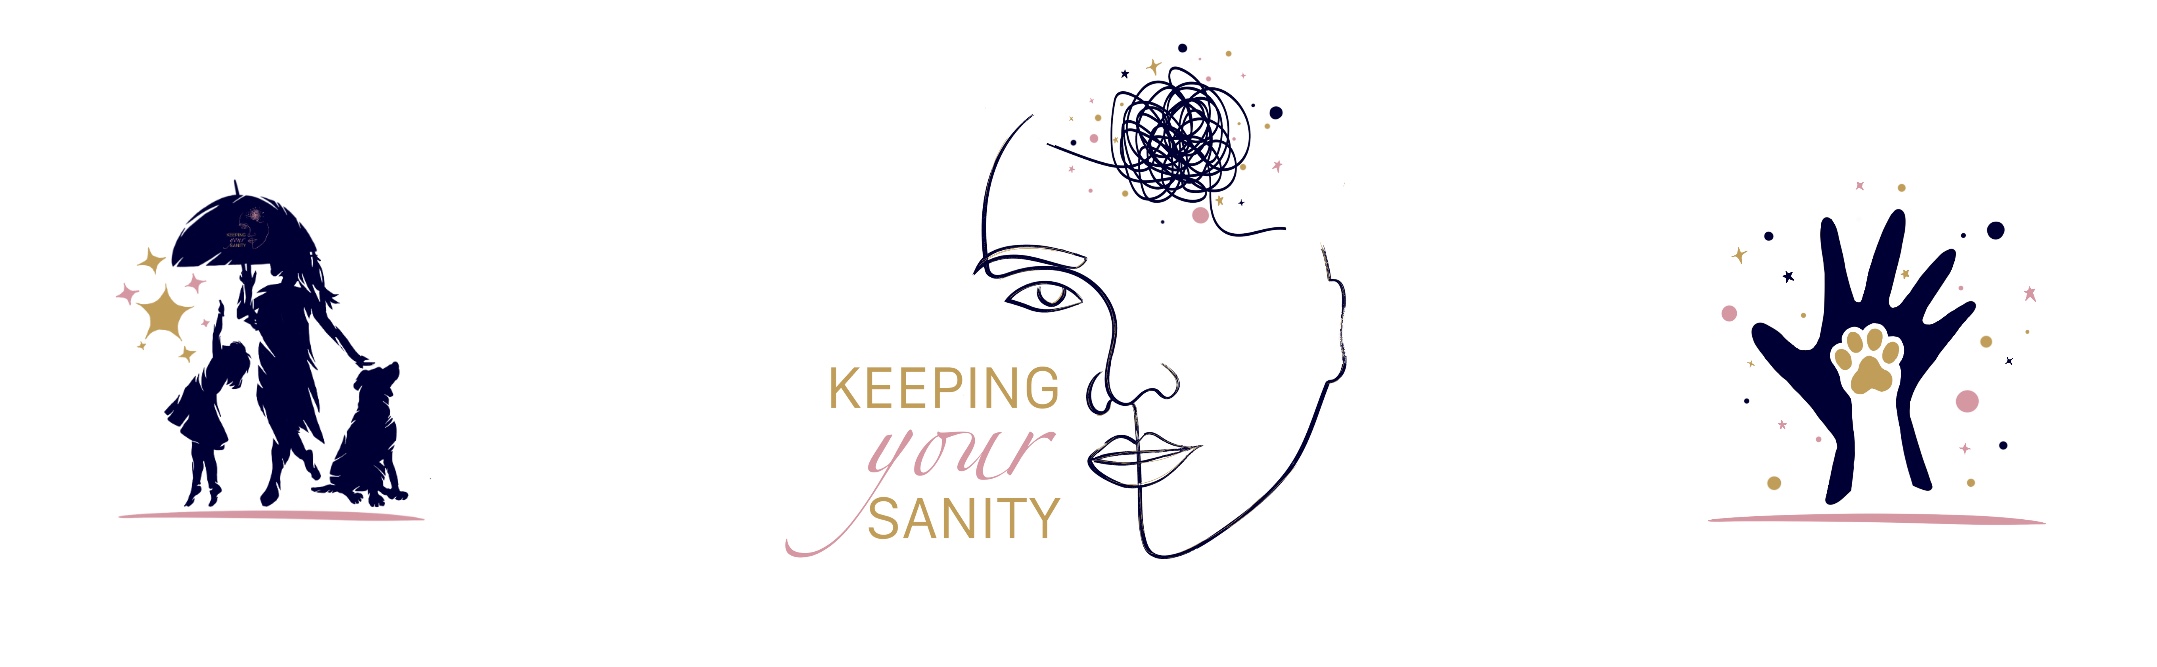 Keeping Your Sanity